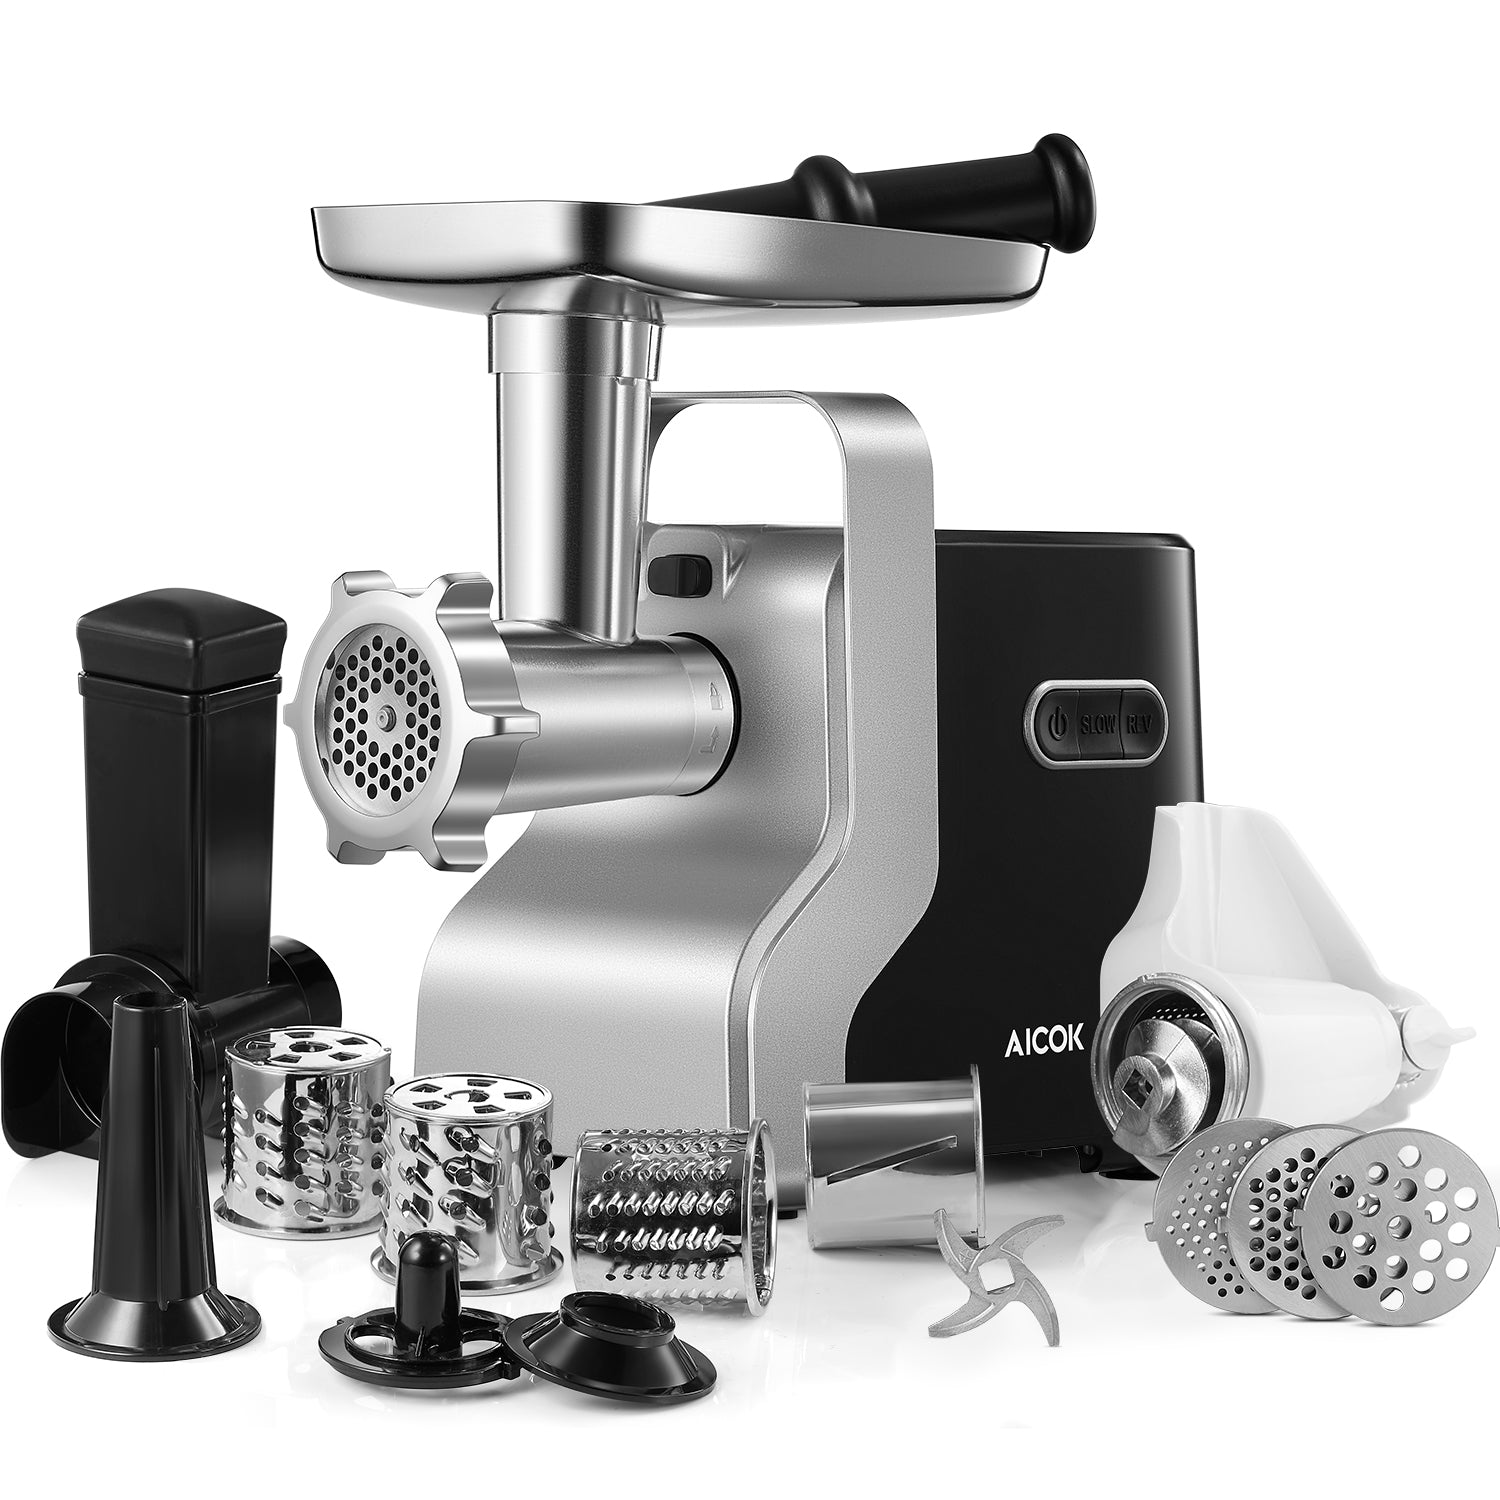 AICOK-5 IN 1 Meat Grinder, 2500W Max Powerful Meat Mincer MG2950R, 5-IN-1 Meat Mincer with sausage stuffer, vegetable sicer, grinder with rich accessories